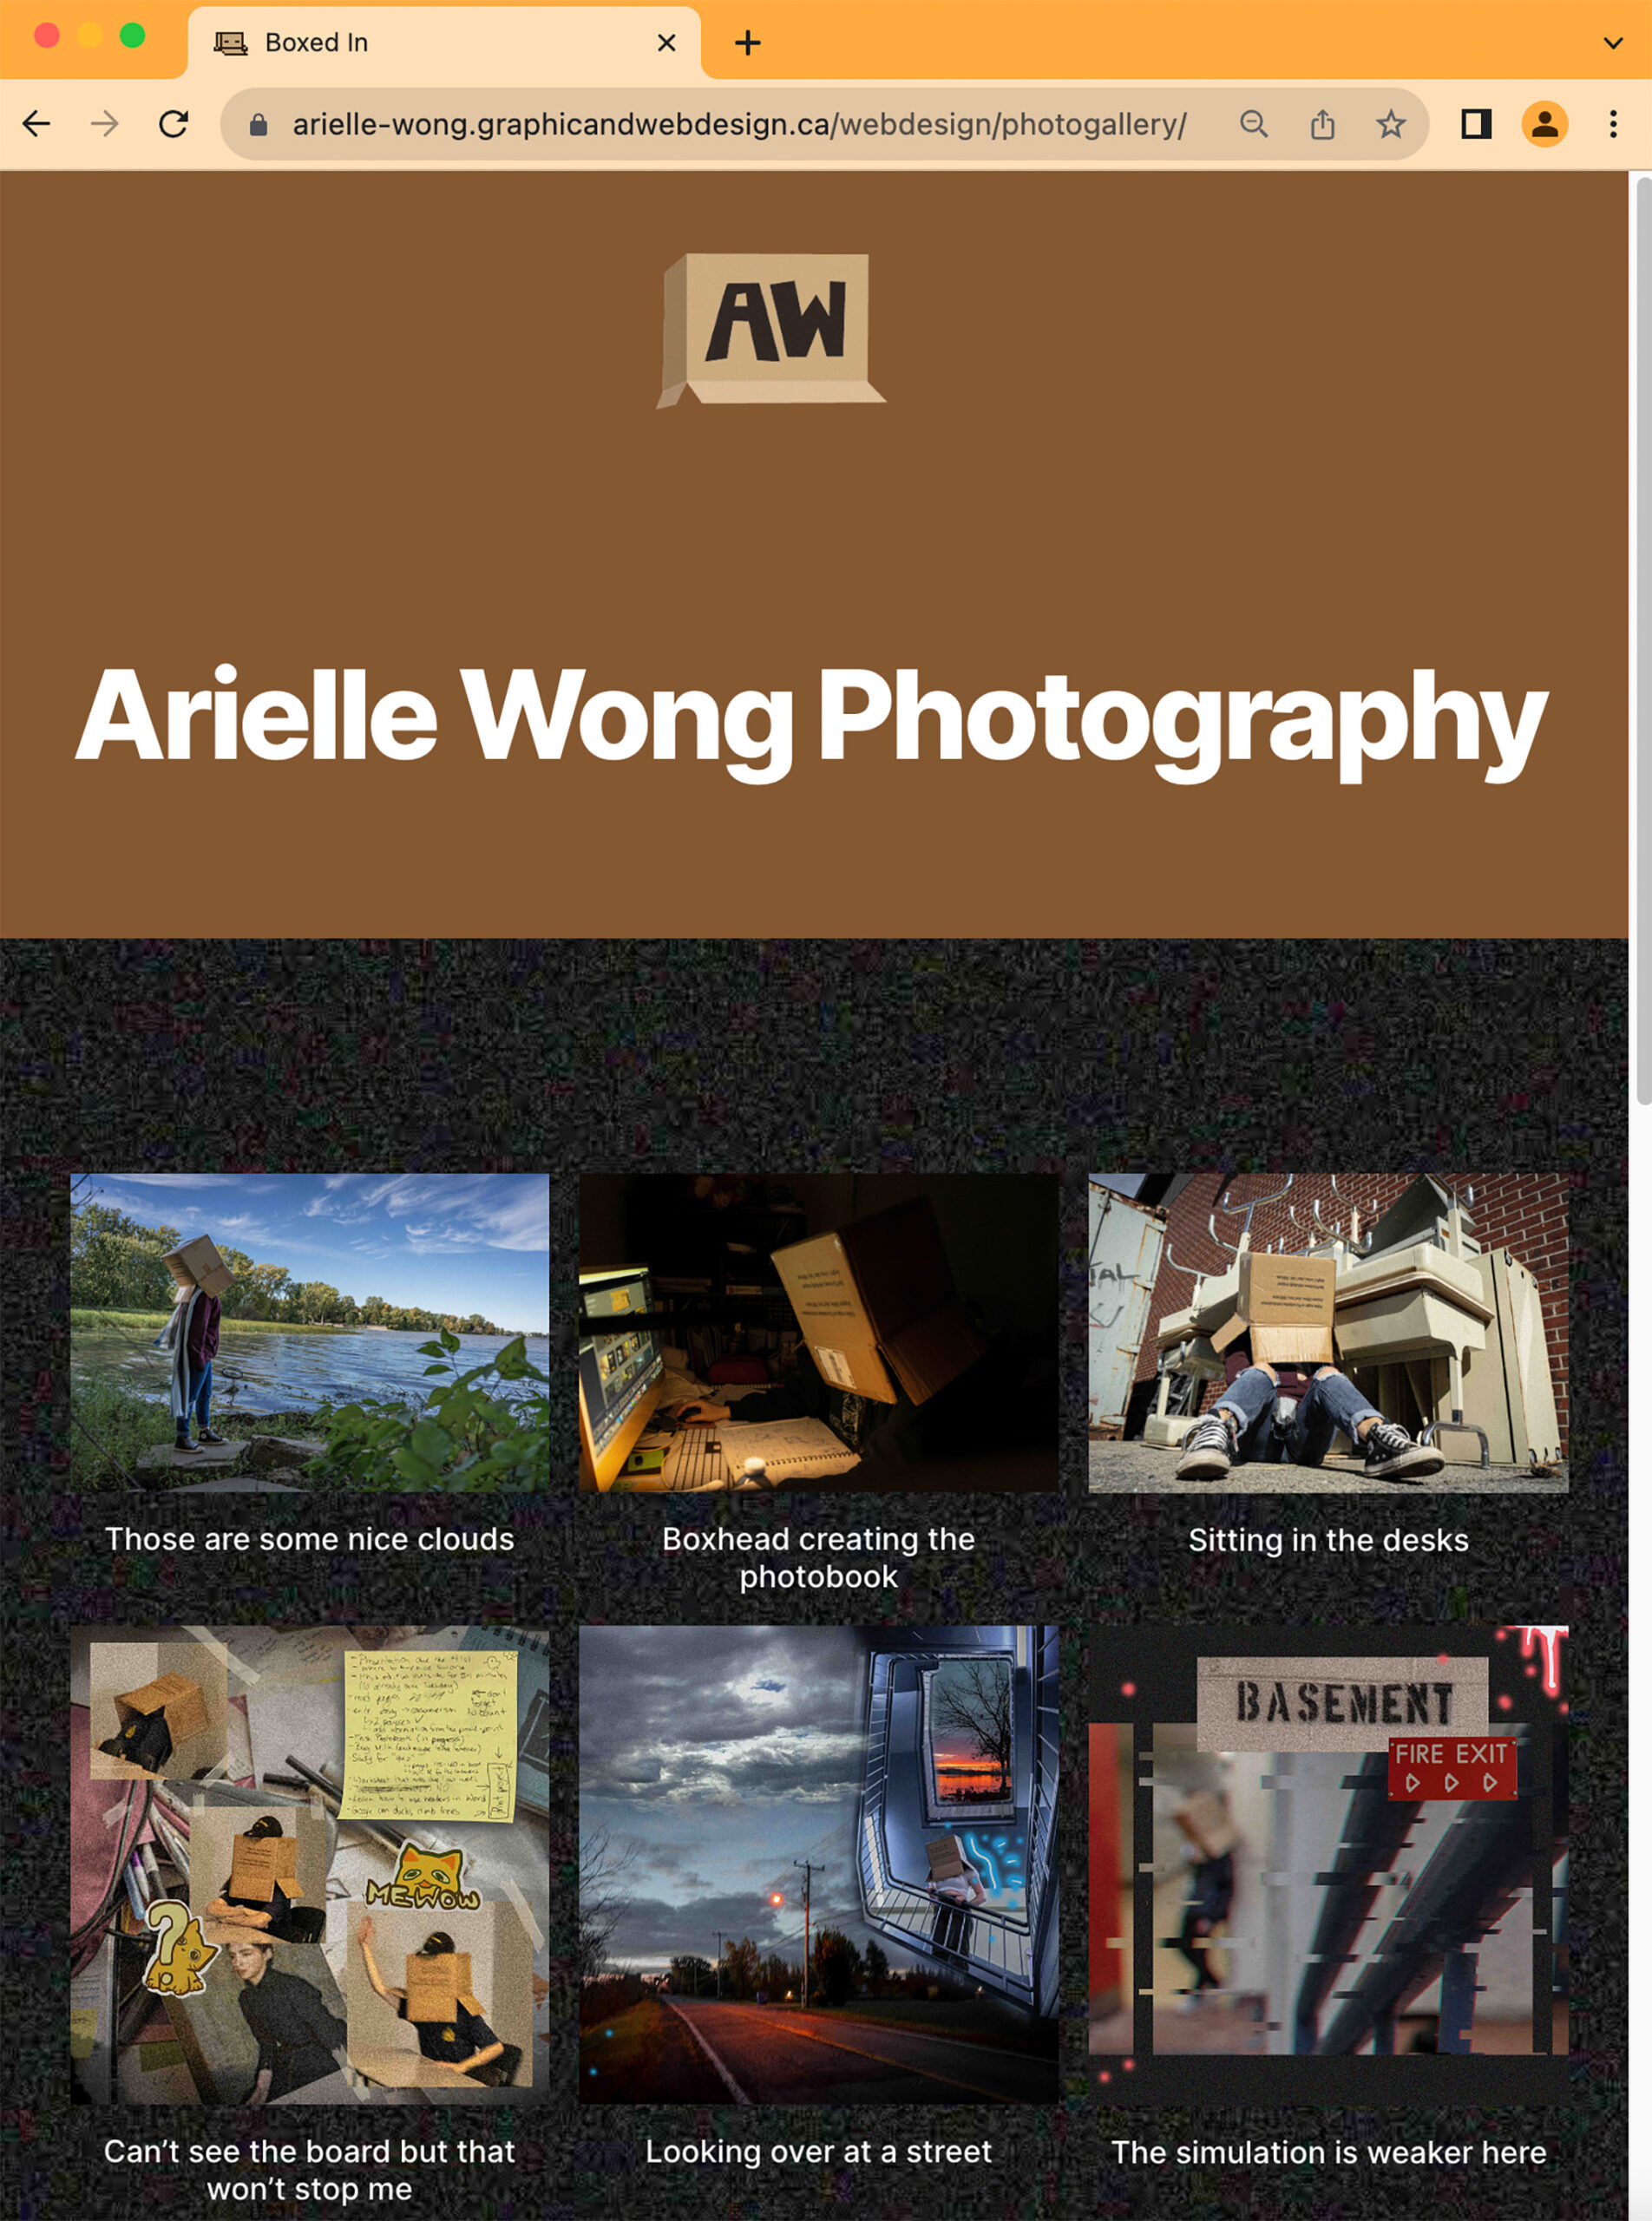 Screenshot of a photo gallery webpage. The theme is cardboard boxes. Every picture is of a person wearing a cardboard box on their head.